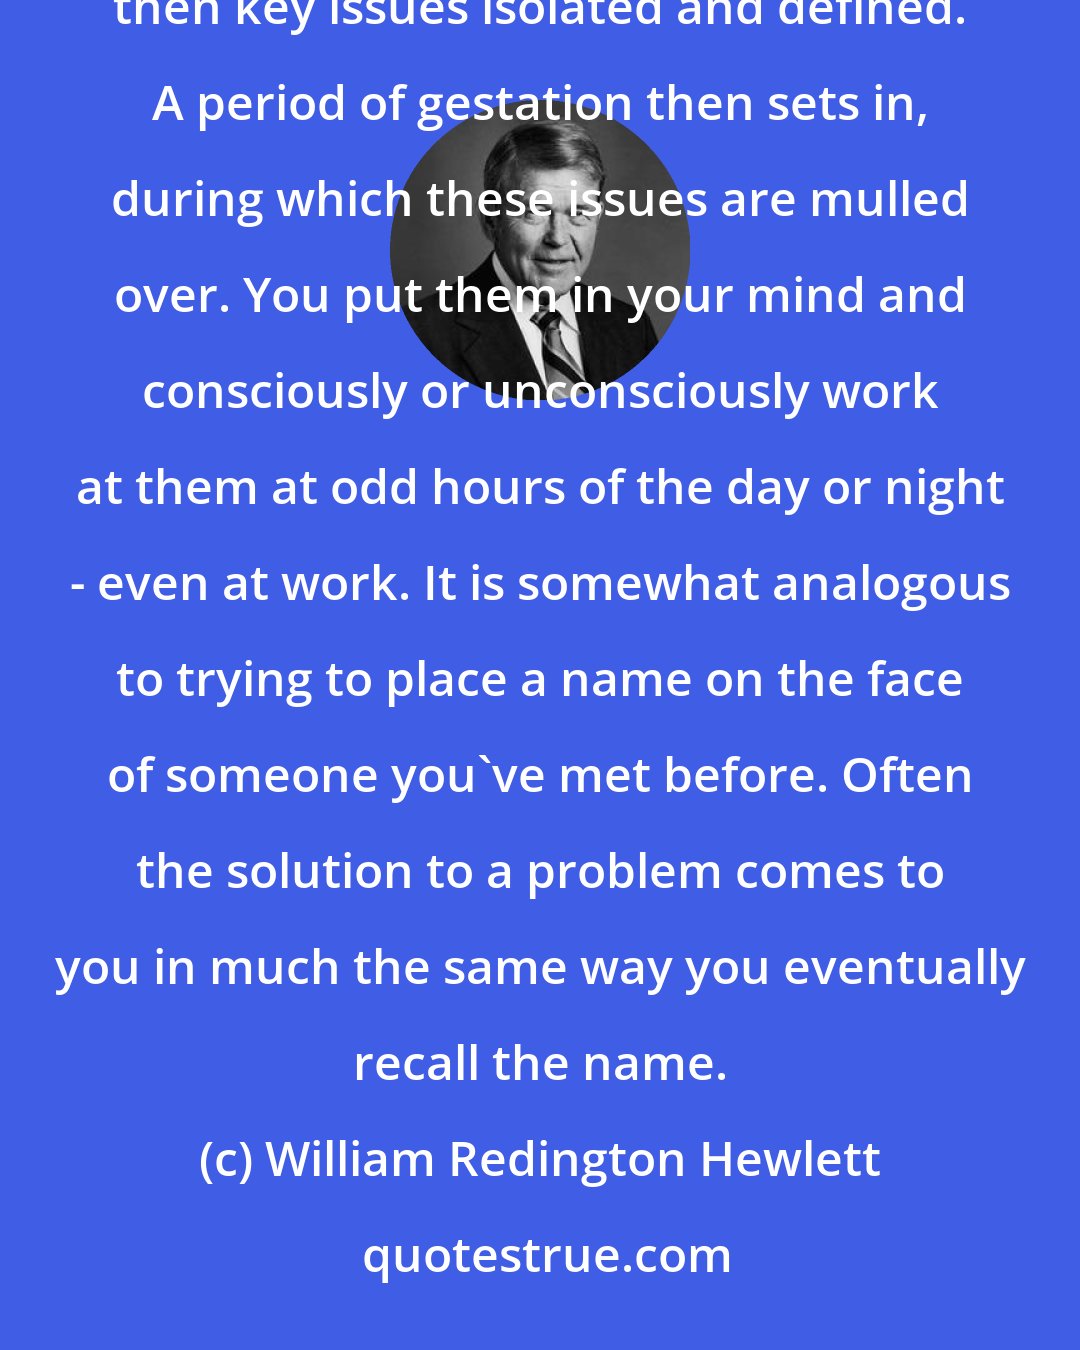 William Redington Hewlett: Problems, however, are rarely solved on the spur of the moment. They must be organized and dissected, then key issues isolated and defined. A period of gestation then sets in, during which these issues are mulled over. You put them in your mind and consciously or unconsciously work at them at odd hours of the day or night - even at work. It is somewhat analogous to trying to place a name on the face of someone you've met before. Often the solution to a problem comes to you in much the same way you eventually recall the name.